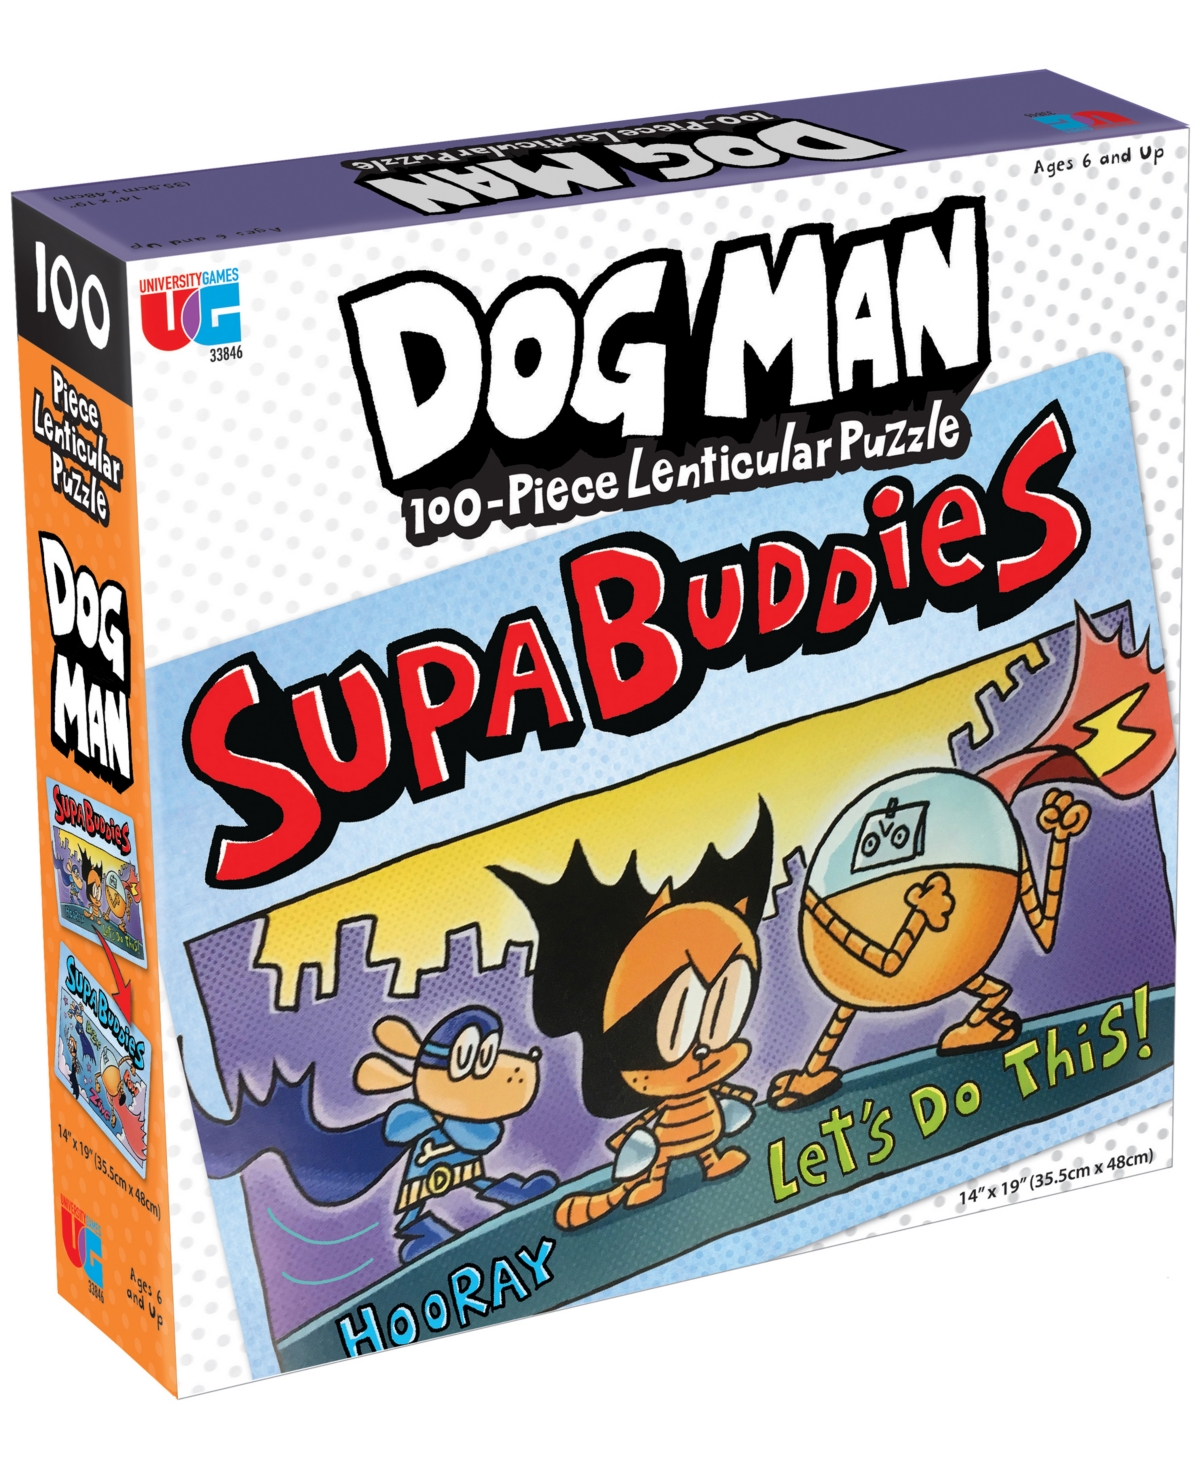 University Games Kids' Dog Man Supa Buddies Lenticular Jigsaw Puzzle In No Color